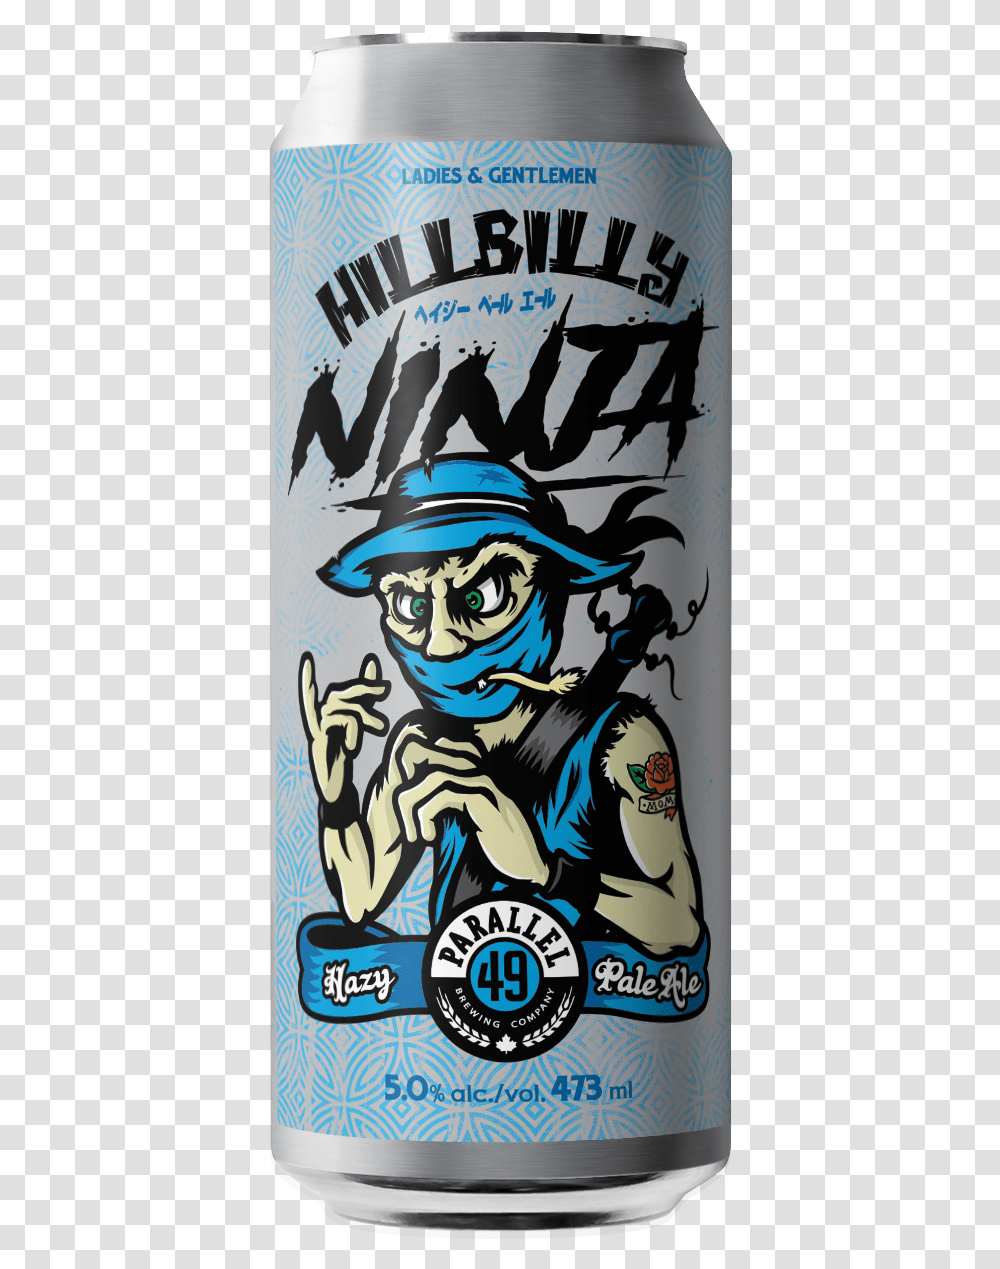 Hillbilly Ninja Coming Soon In Selected Markets, Label, Sticker Transparent Png